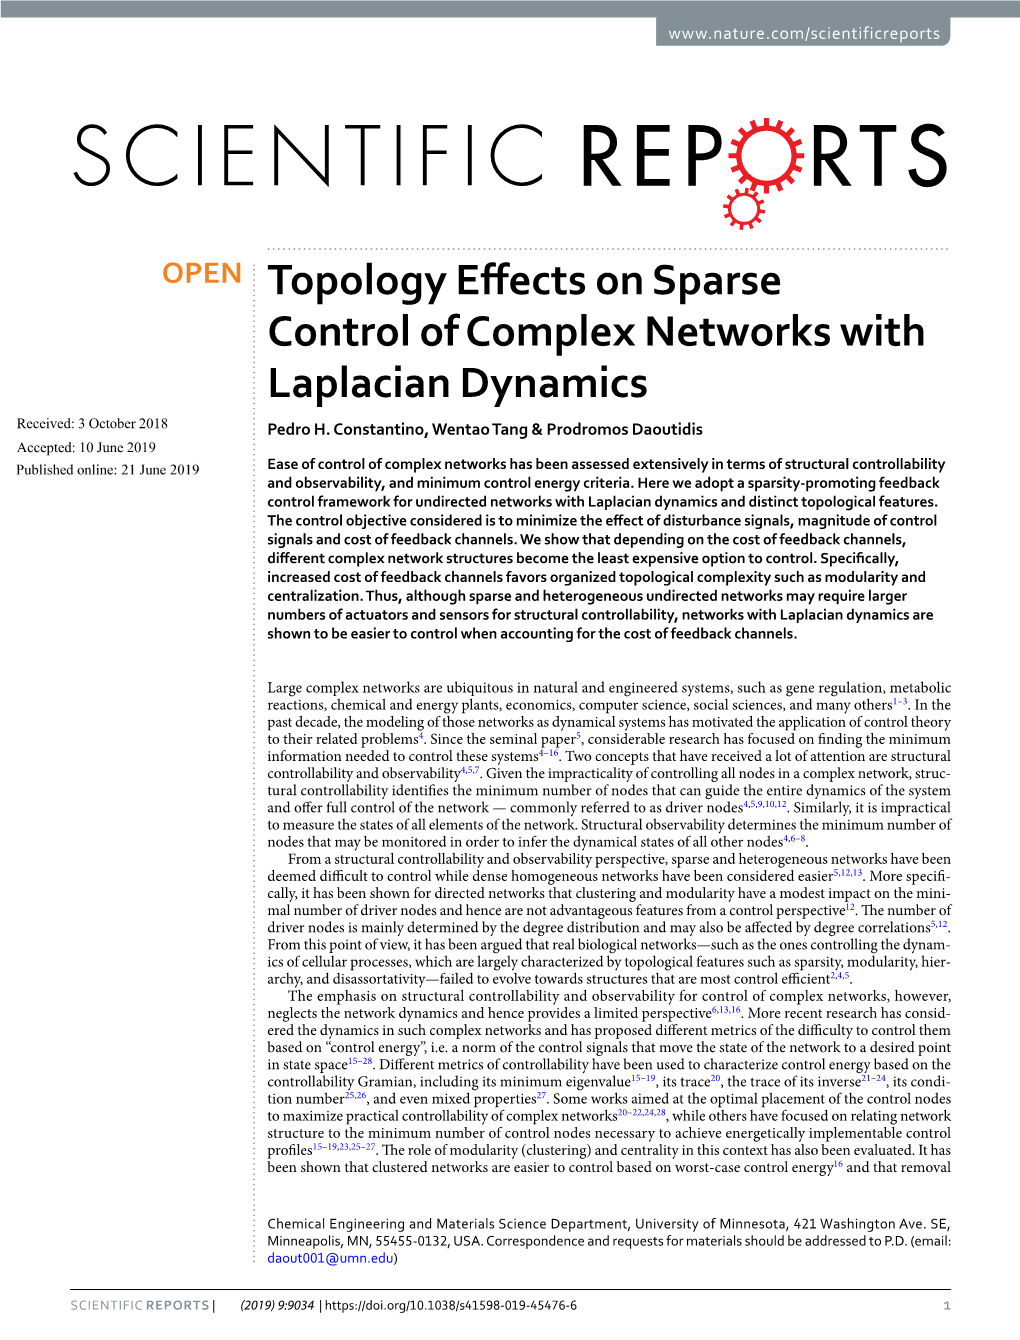 Topology Effects on Sparse Control of Complex Networks with Laplacian